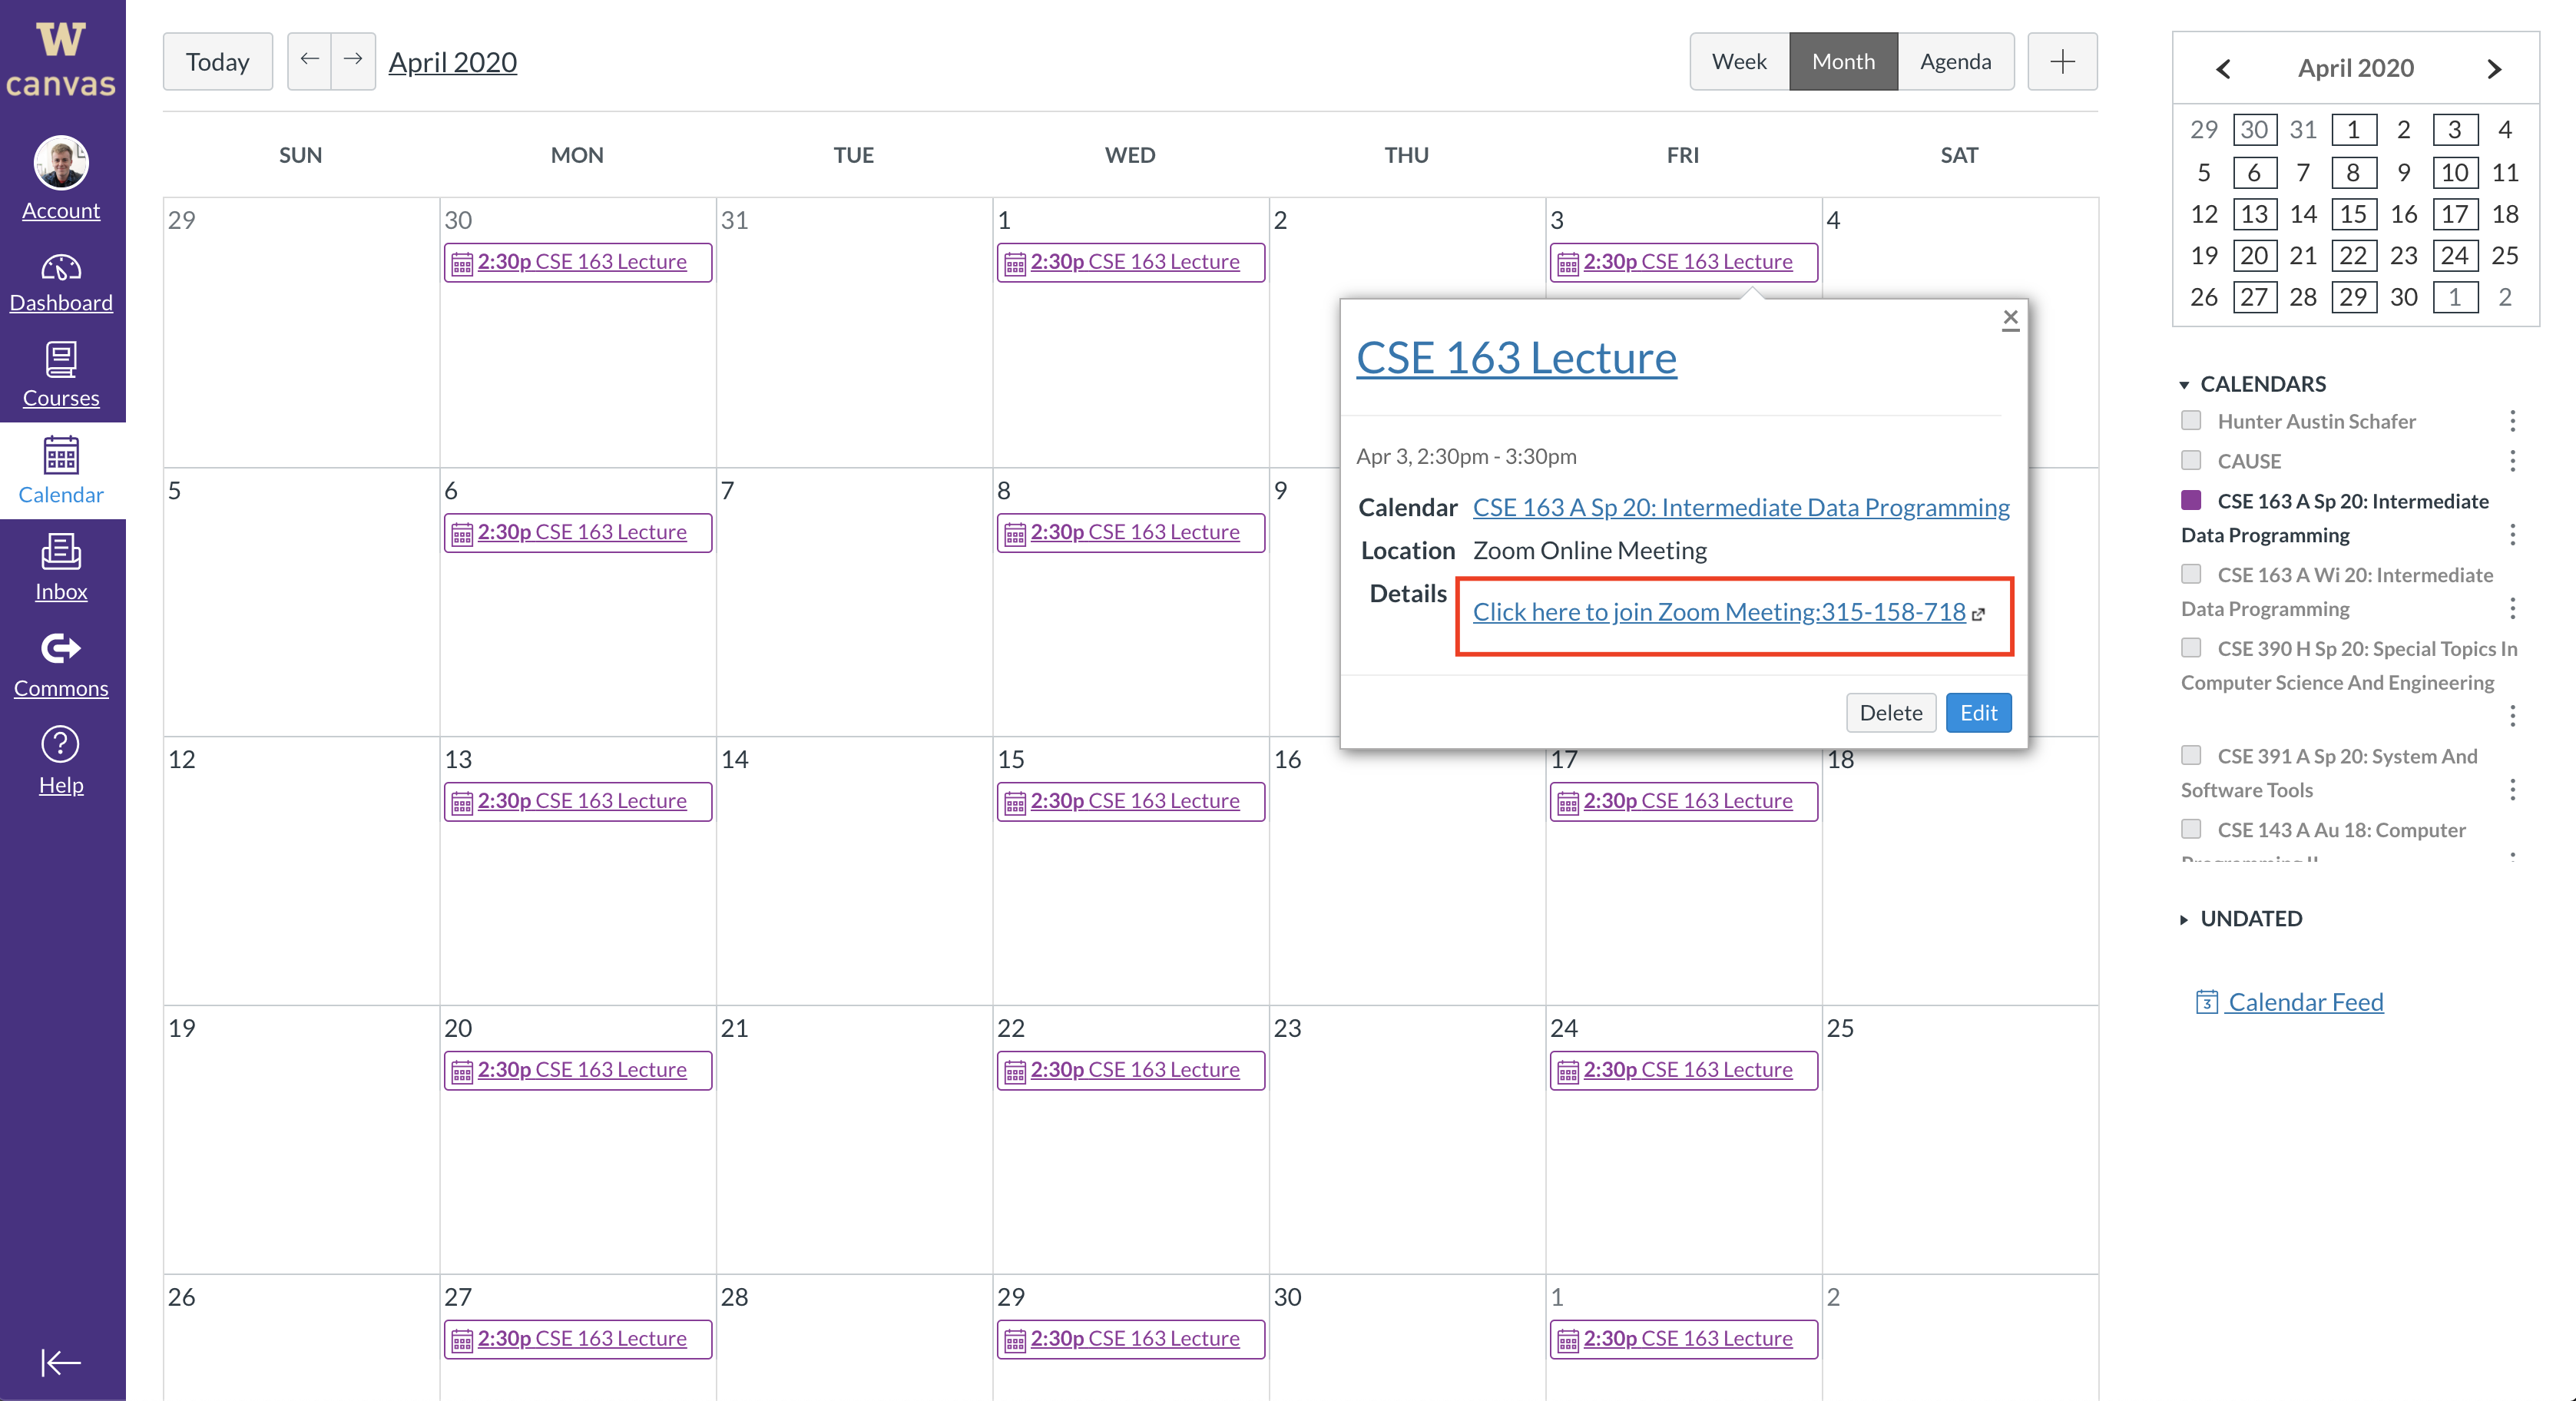 Clicking on the 'Join' link for a Zoom event in Canvas calendar